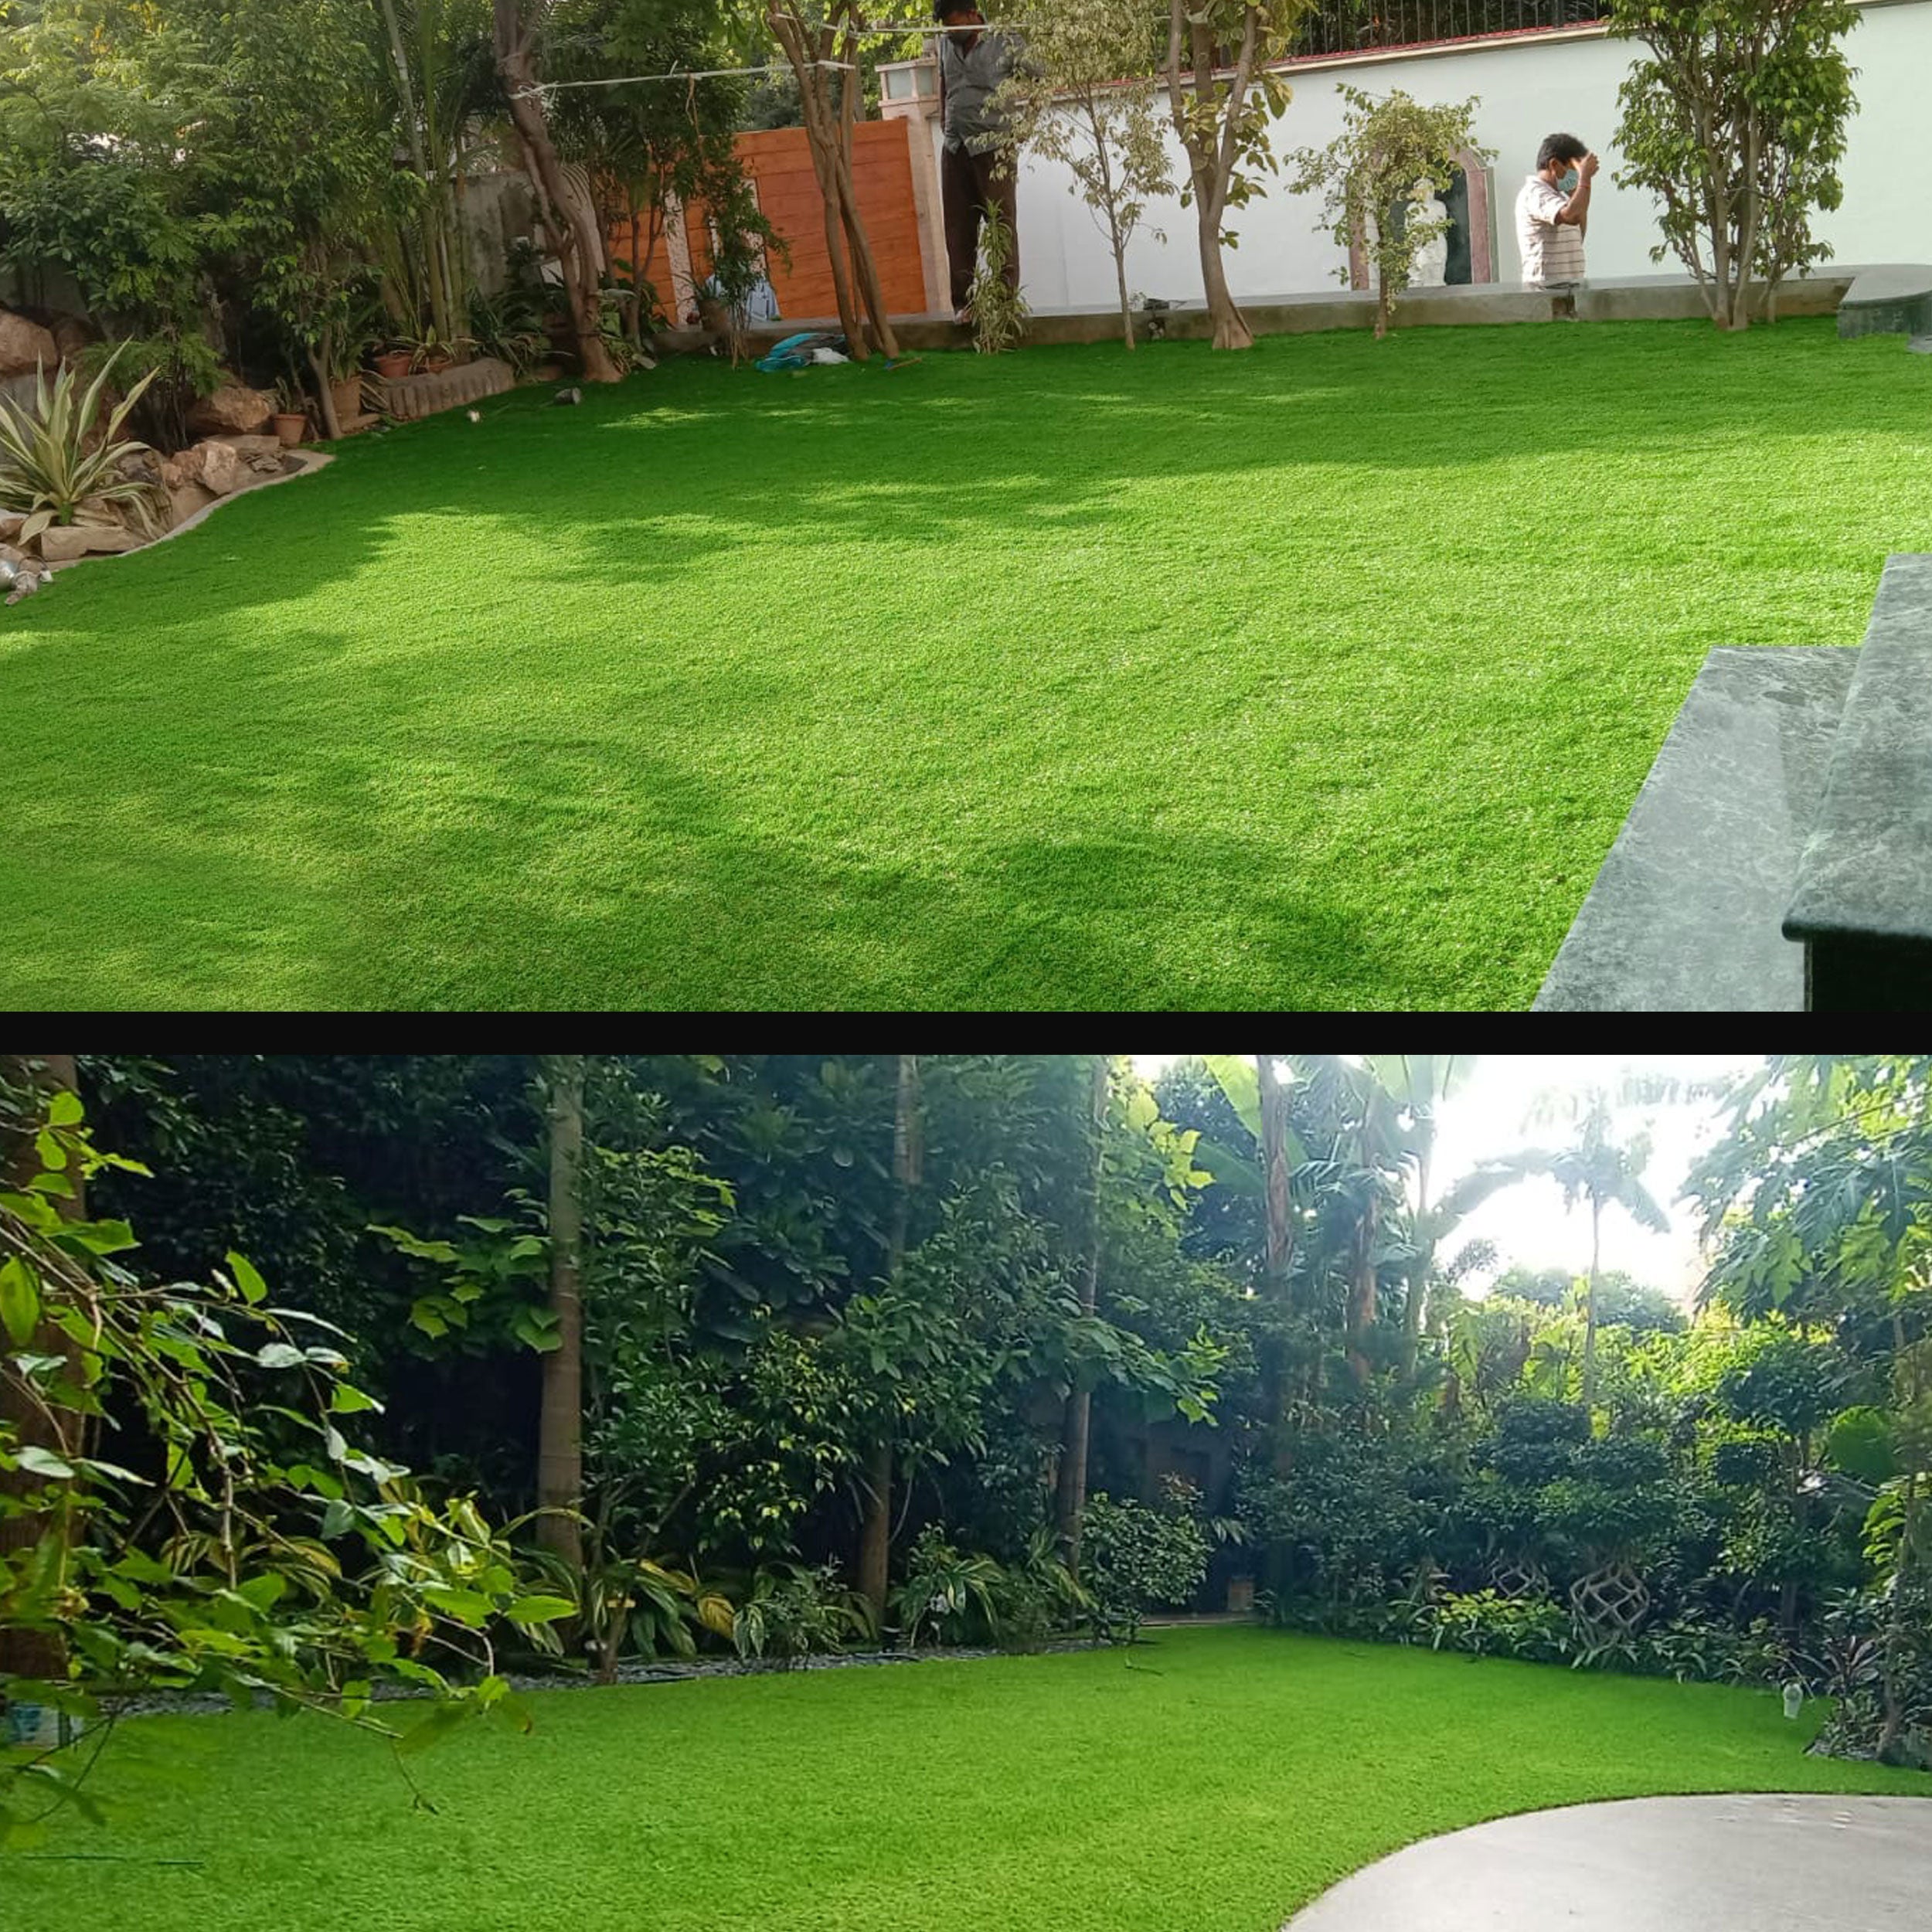 52mm Mint Artificial Grass 6.5 Feet Width PE & PU Material Grass For Indoor And Outdoor Use